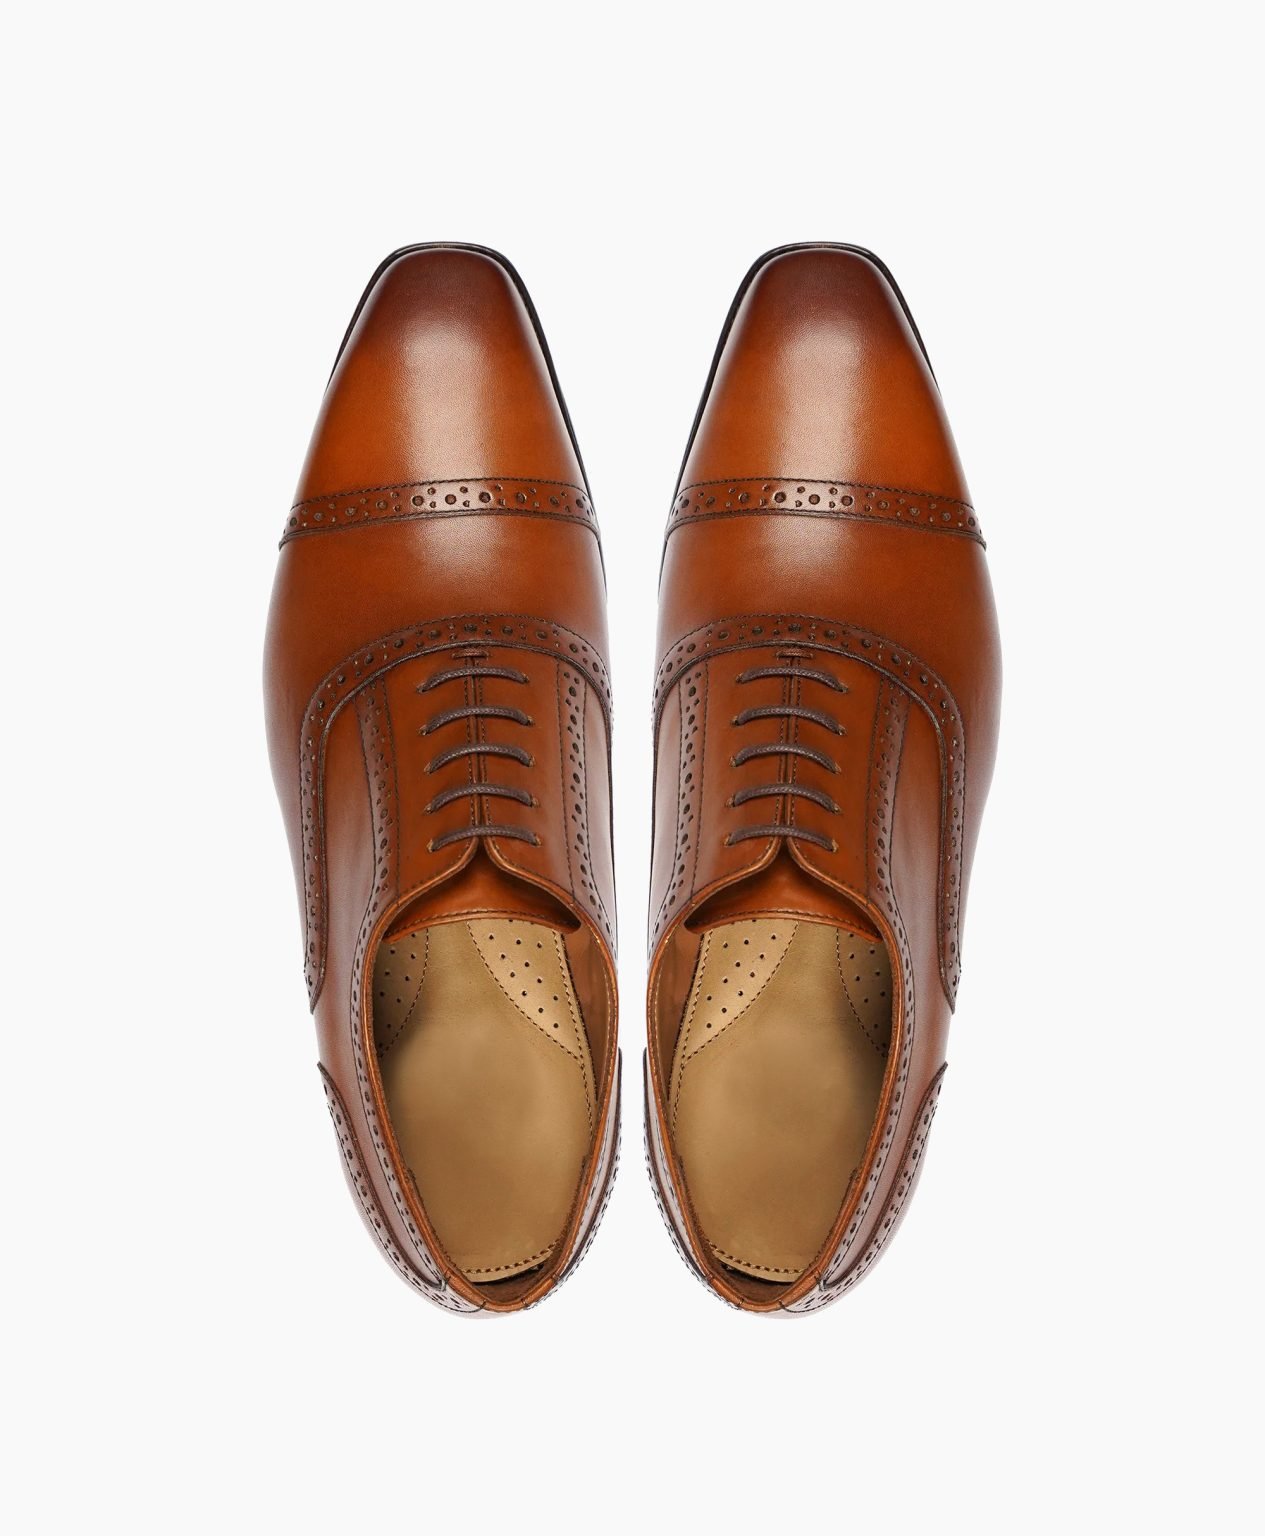 fowey-oxford-light-brown-leather-shoes-image202